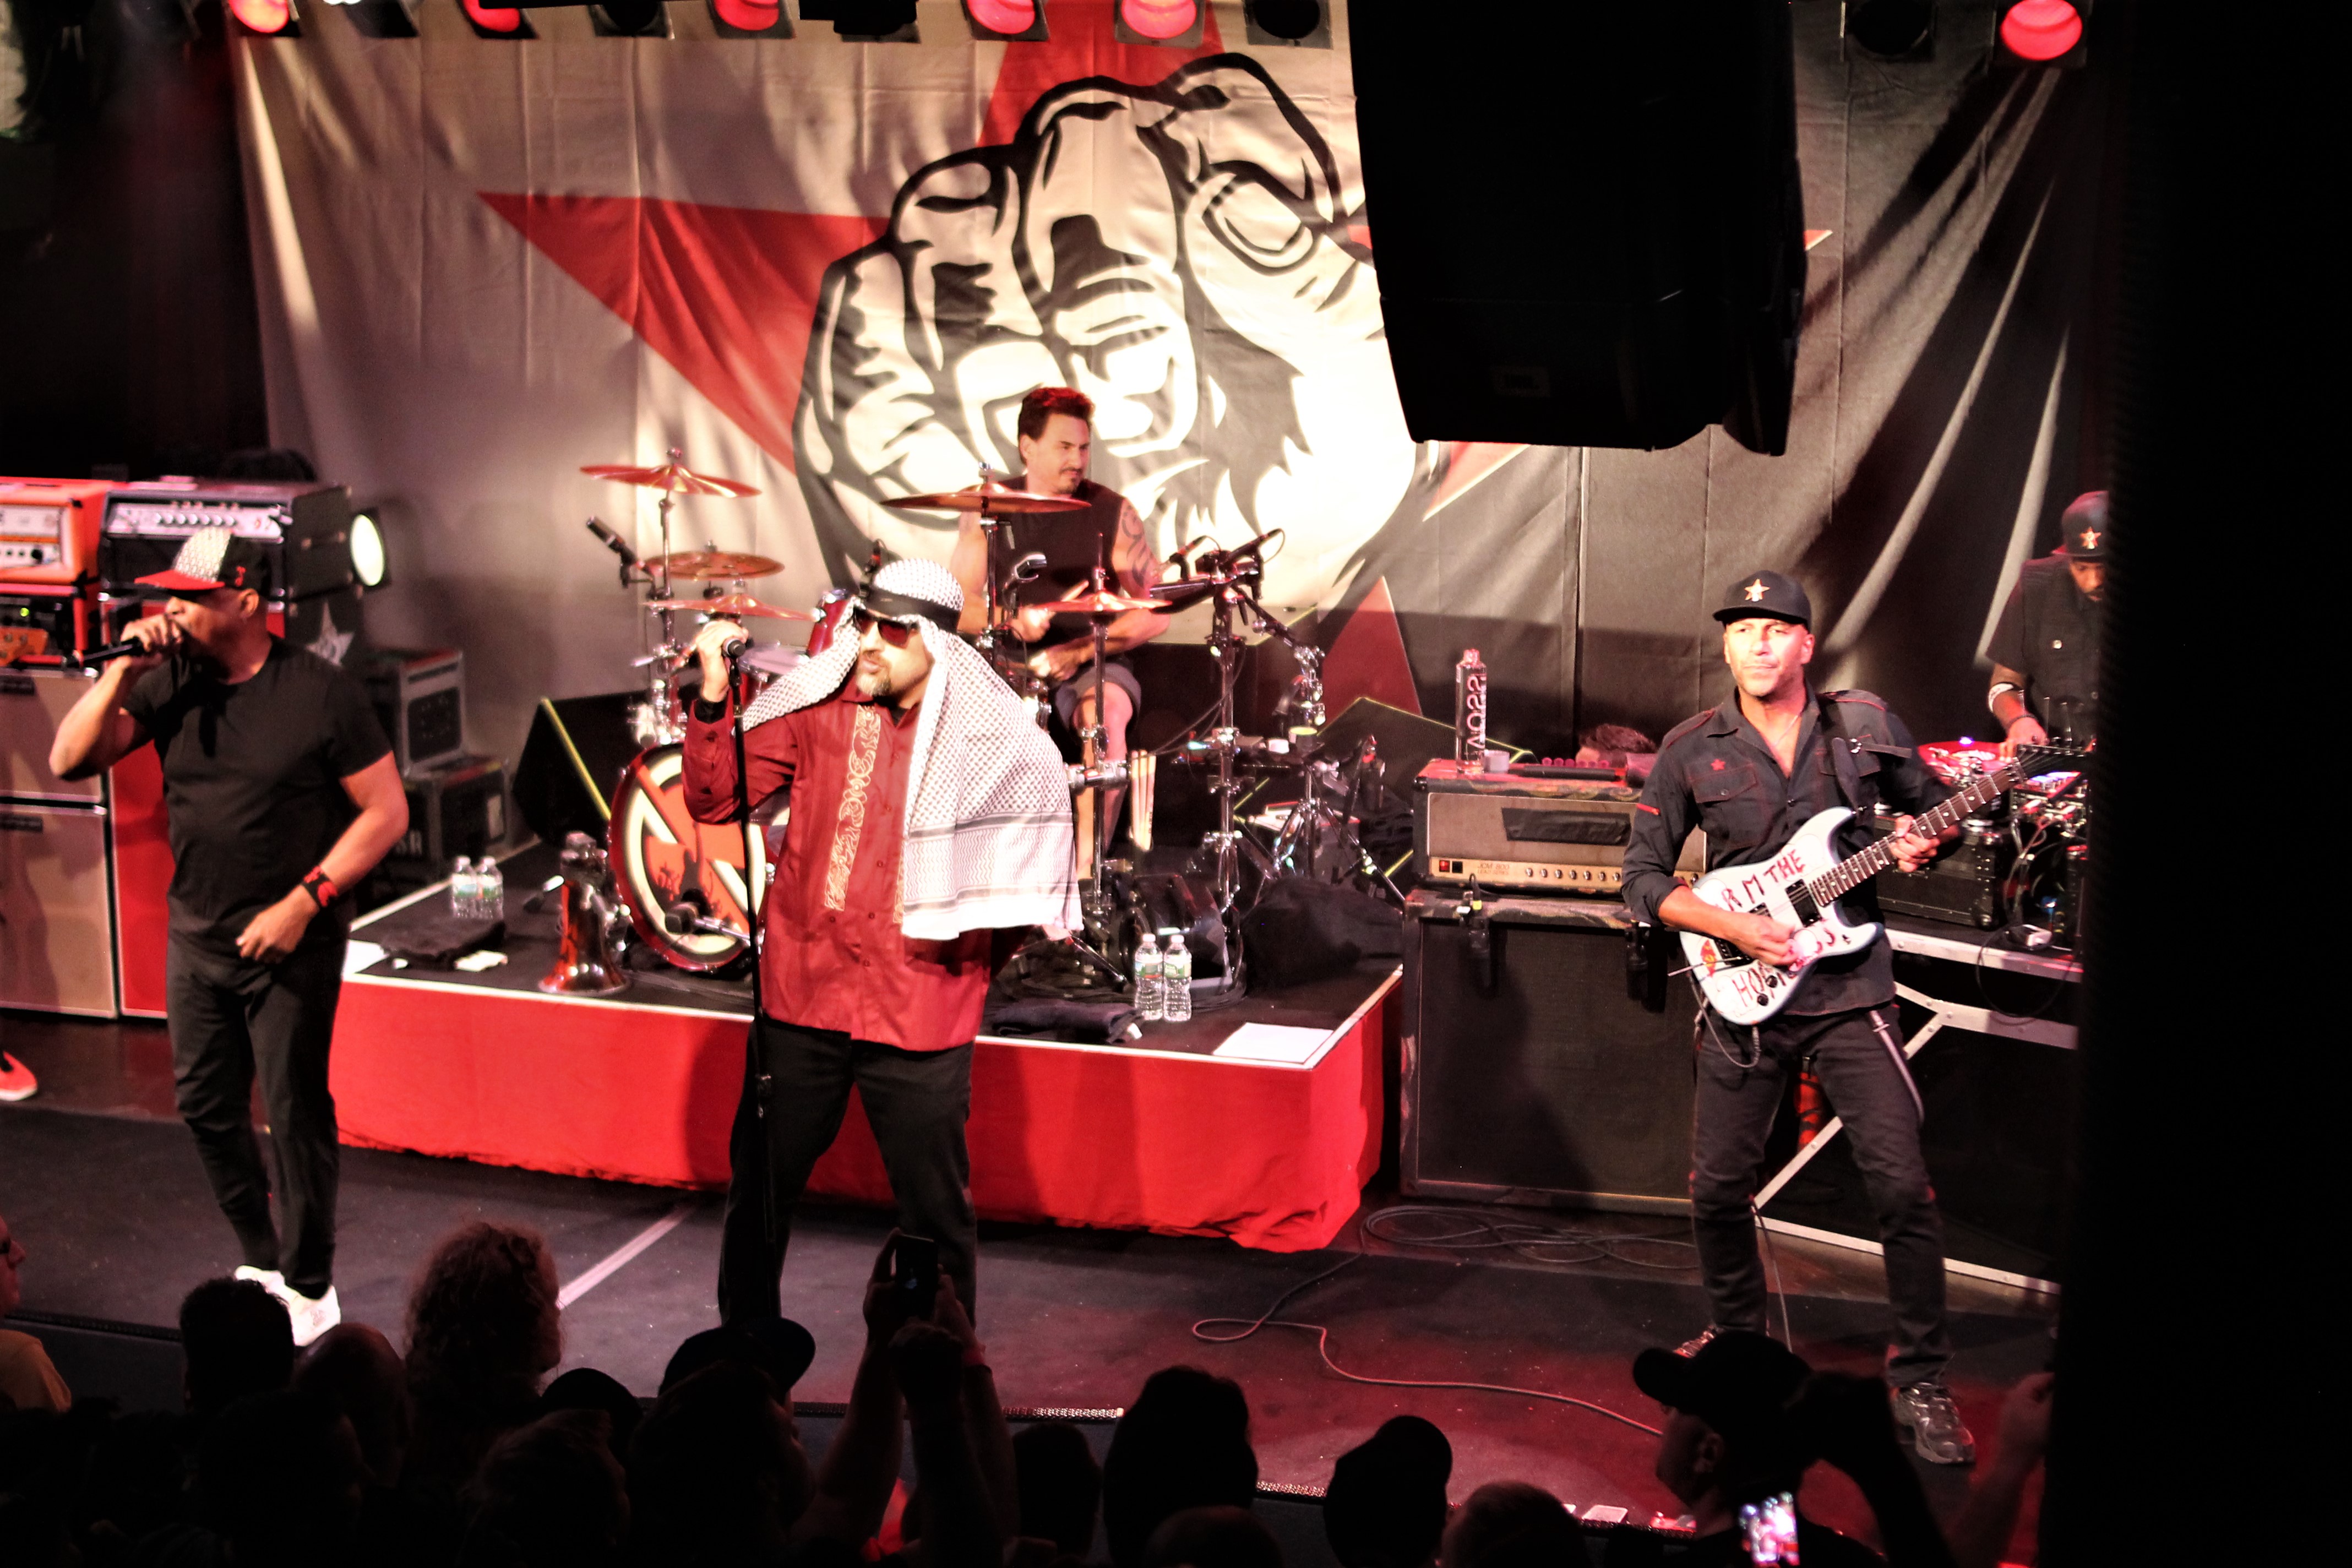 Live show review: Prophets of Rage